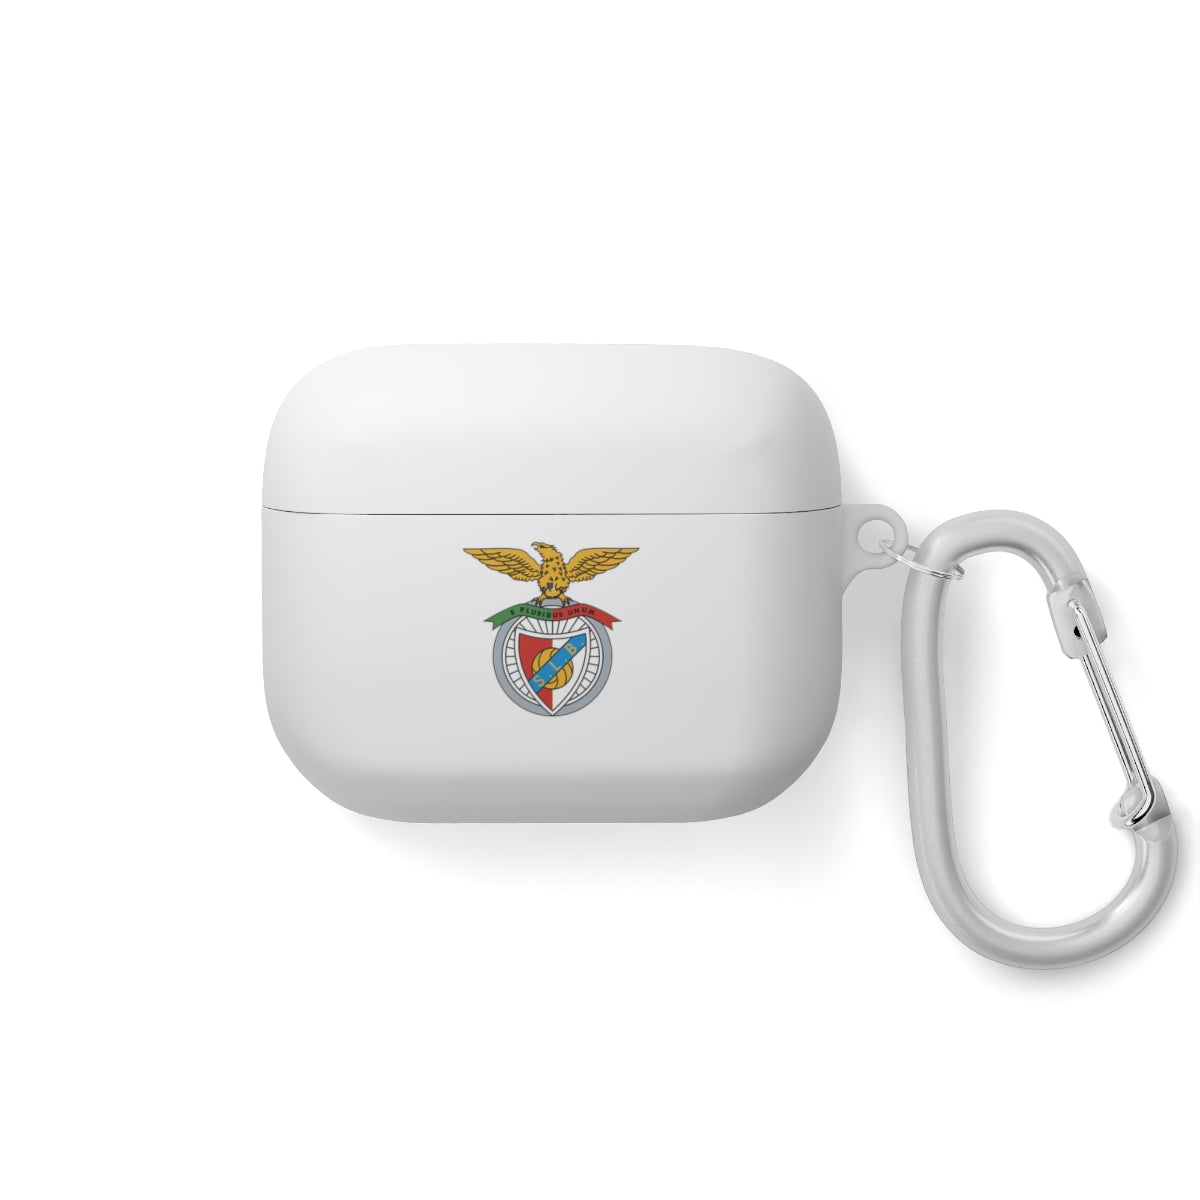 Benfica AirPods and AirPods Pro Case Cover